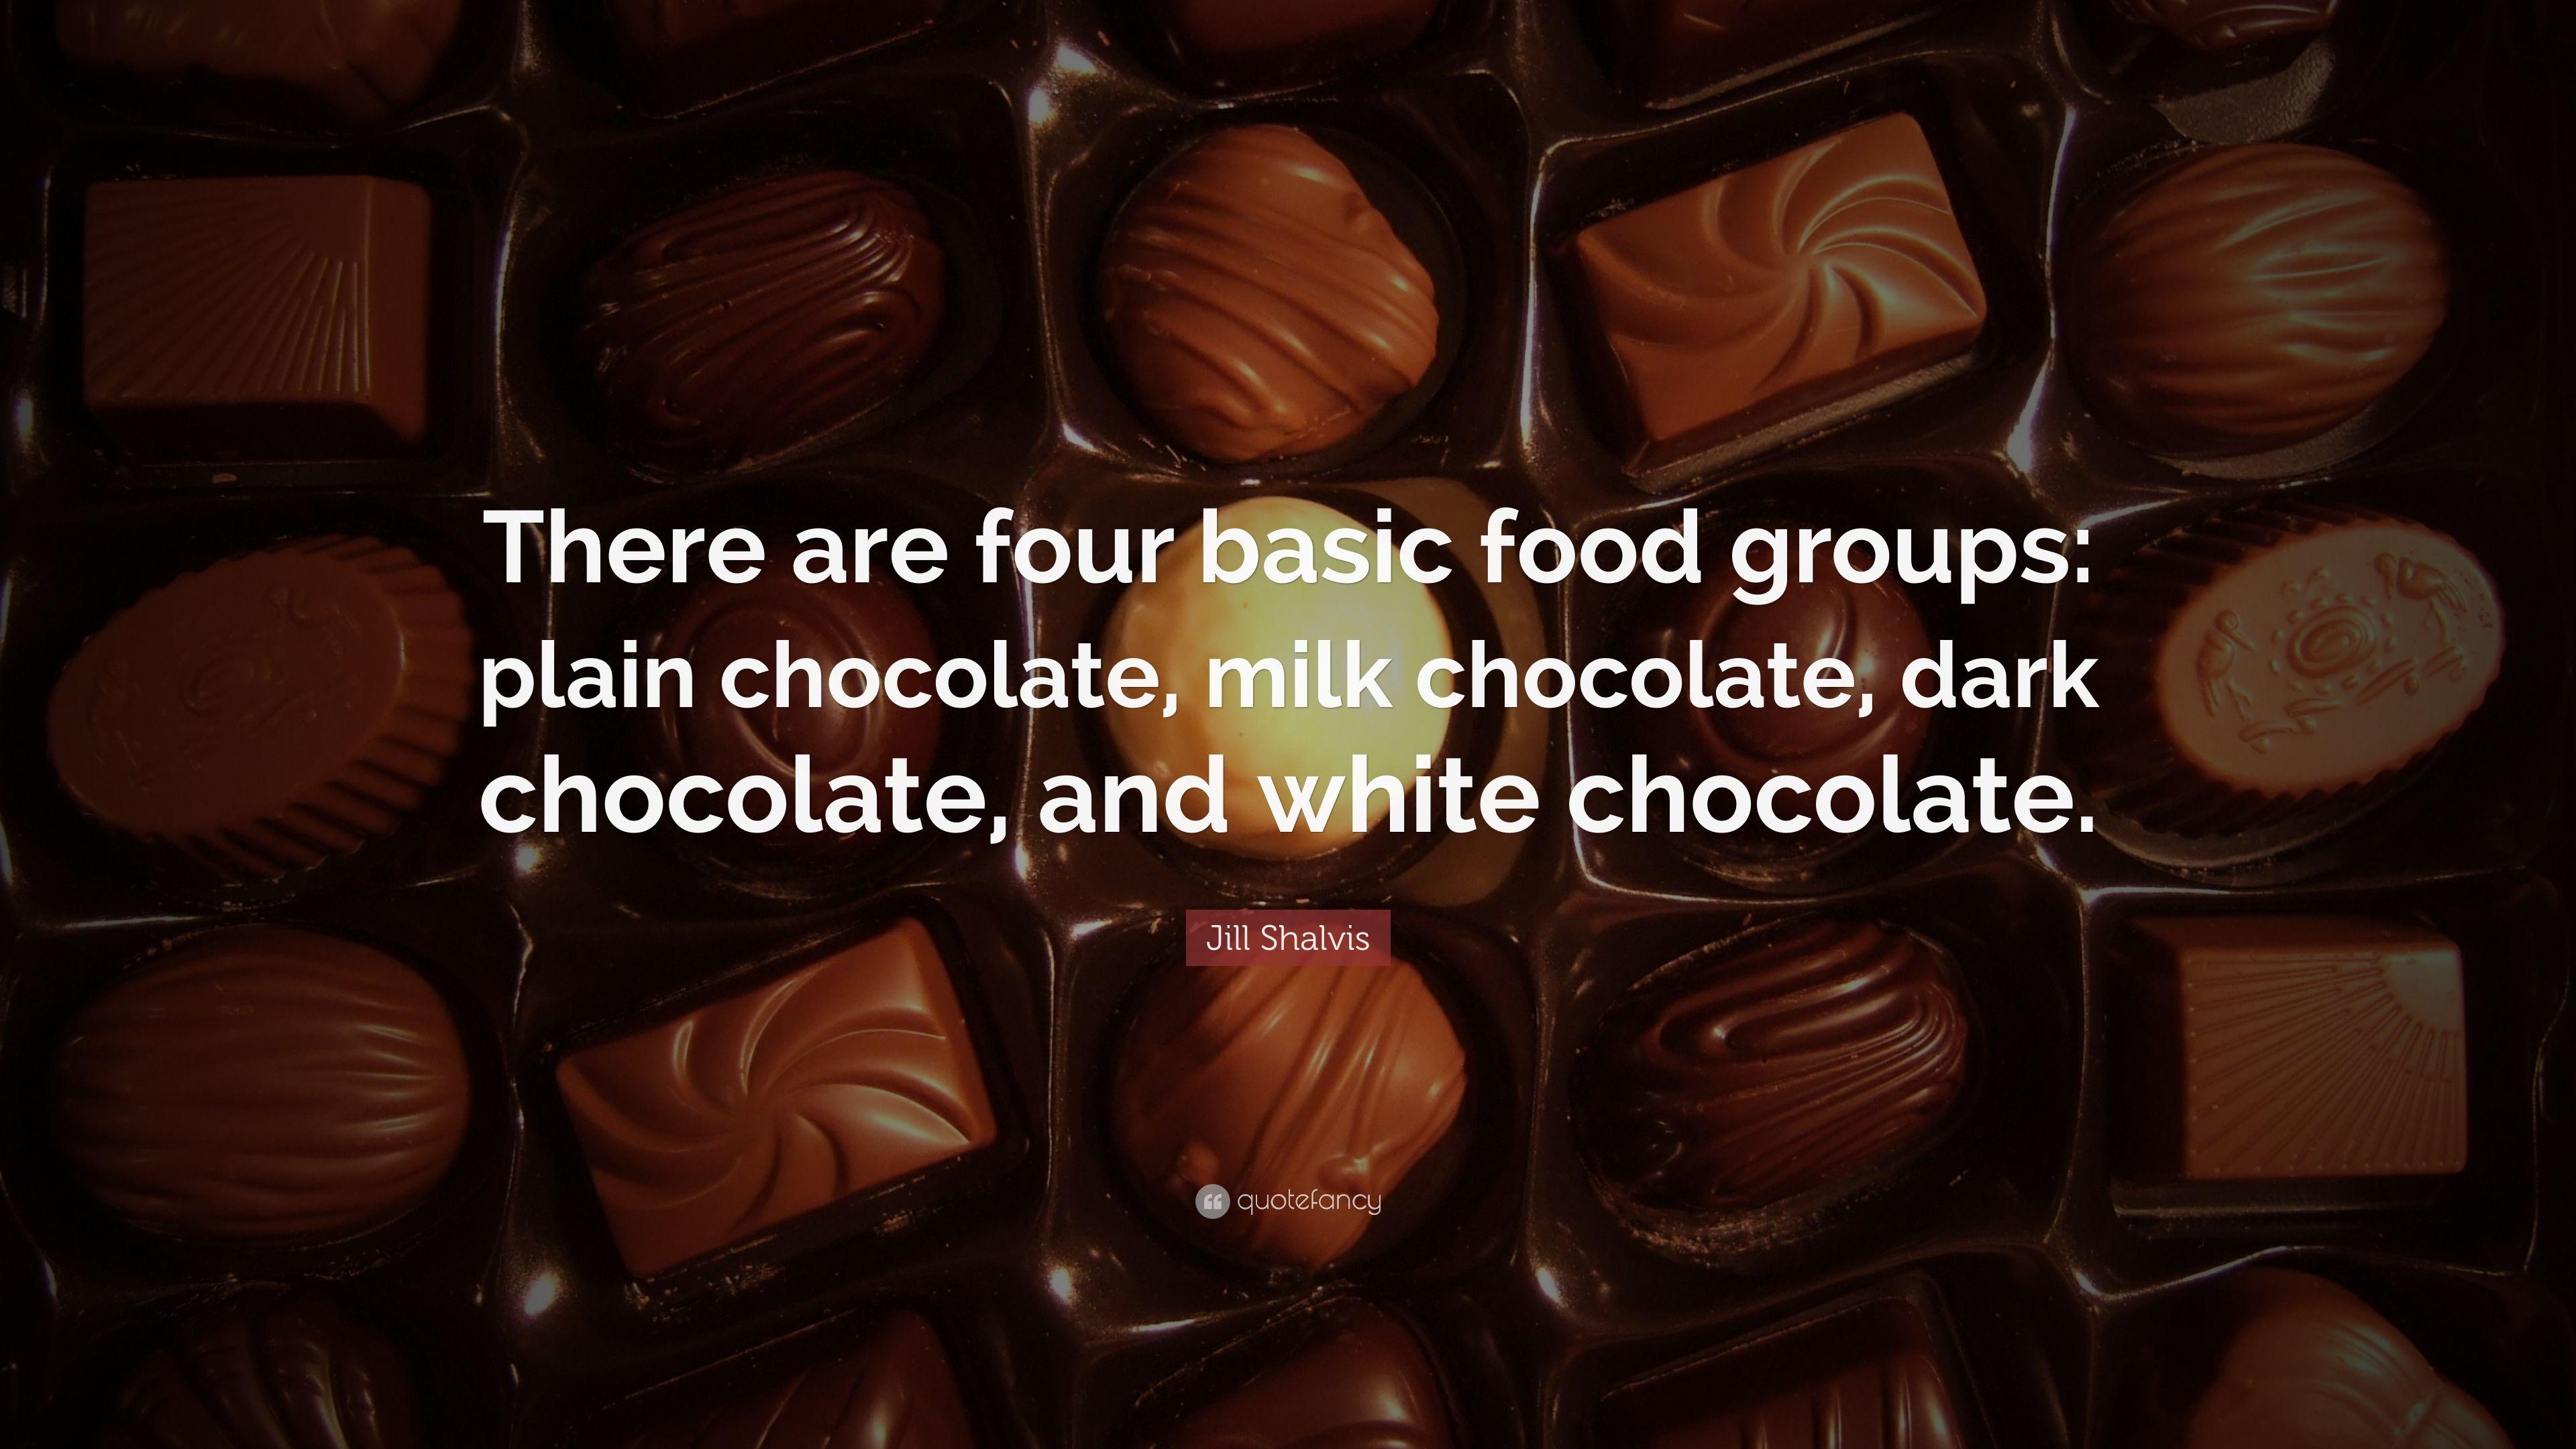 Jill Shalvis Quote: “There are four basic food groups: plain